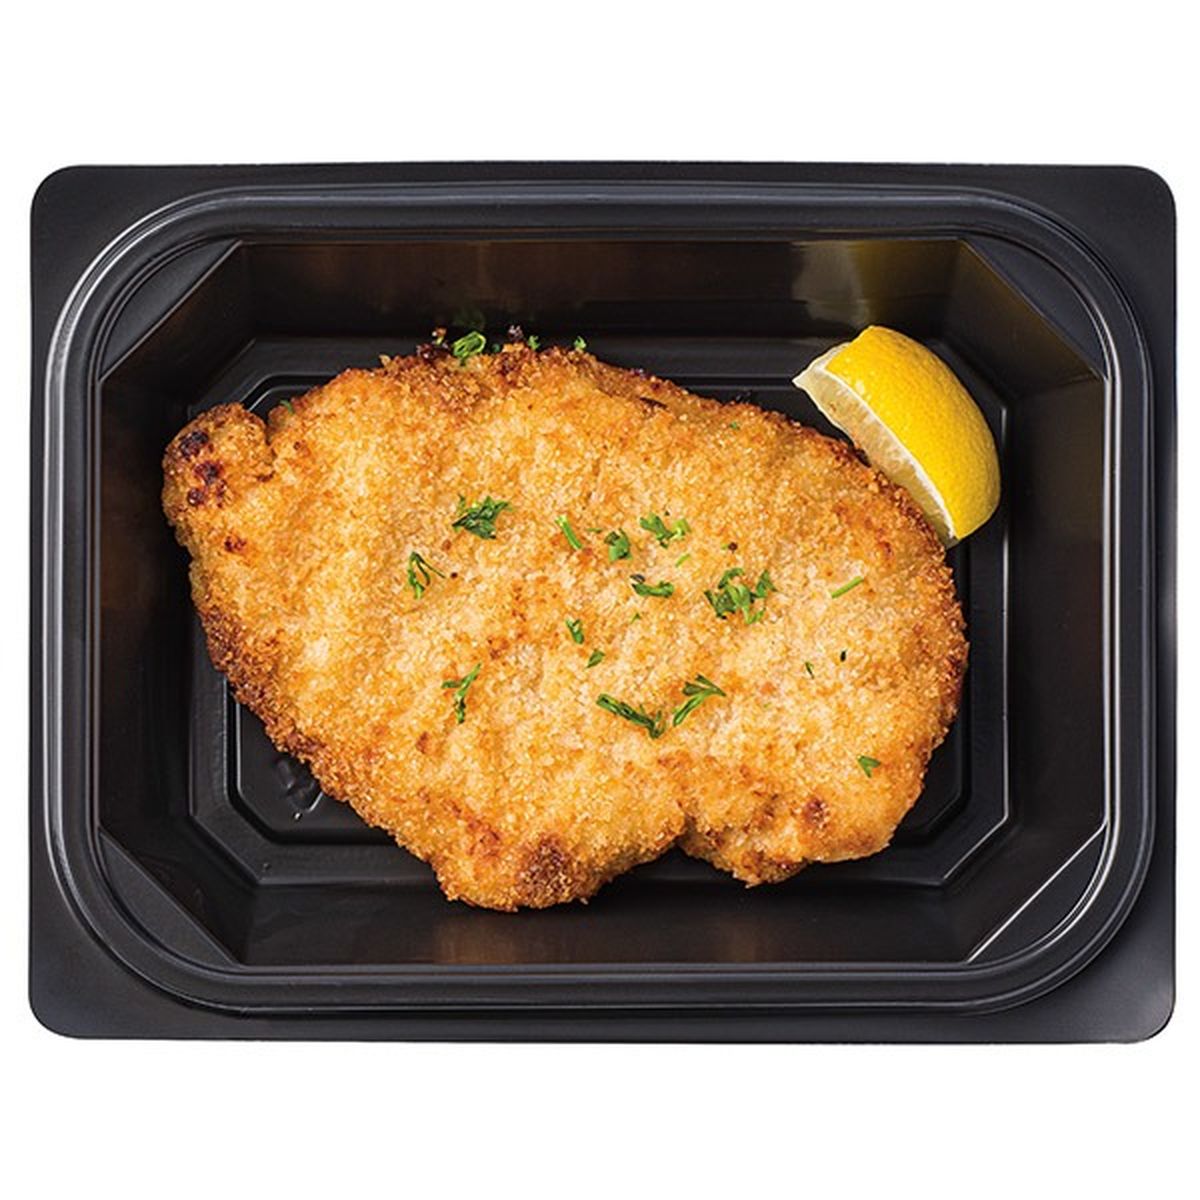 Calories in Wegmans Breaded Chicken Cutlet Raised without Antibiotics with Lemon Wedge  - Fully Cooked